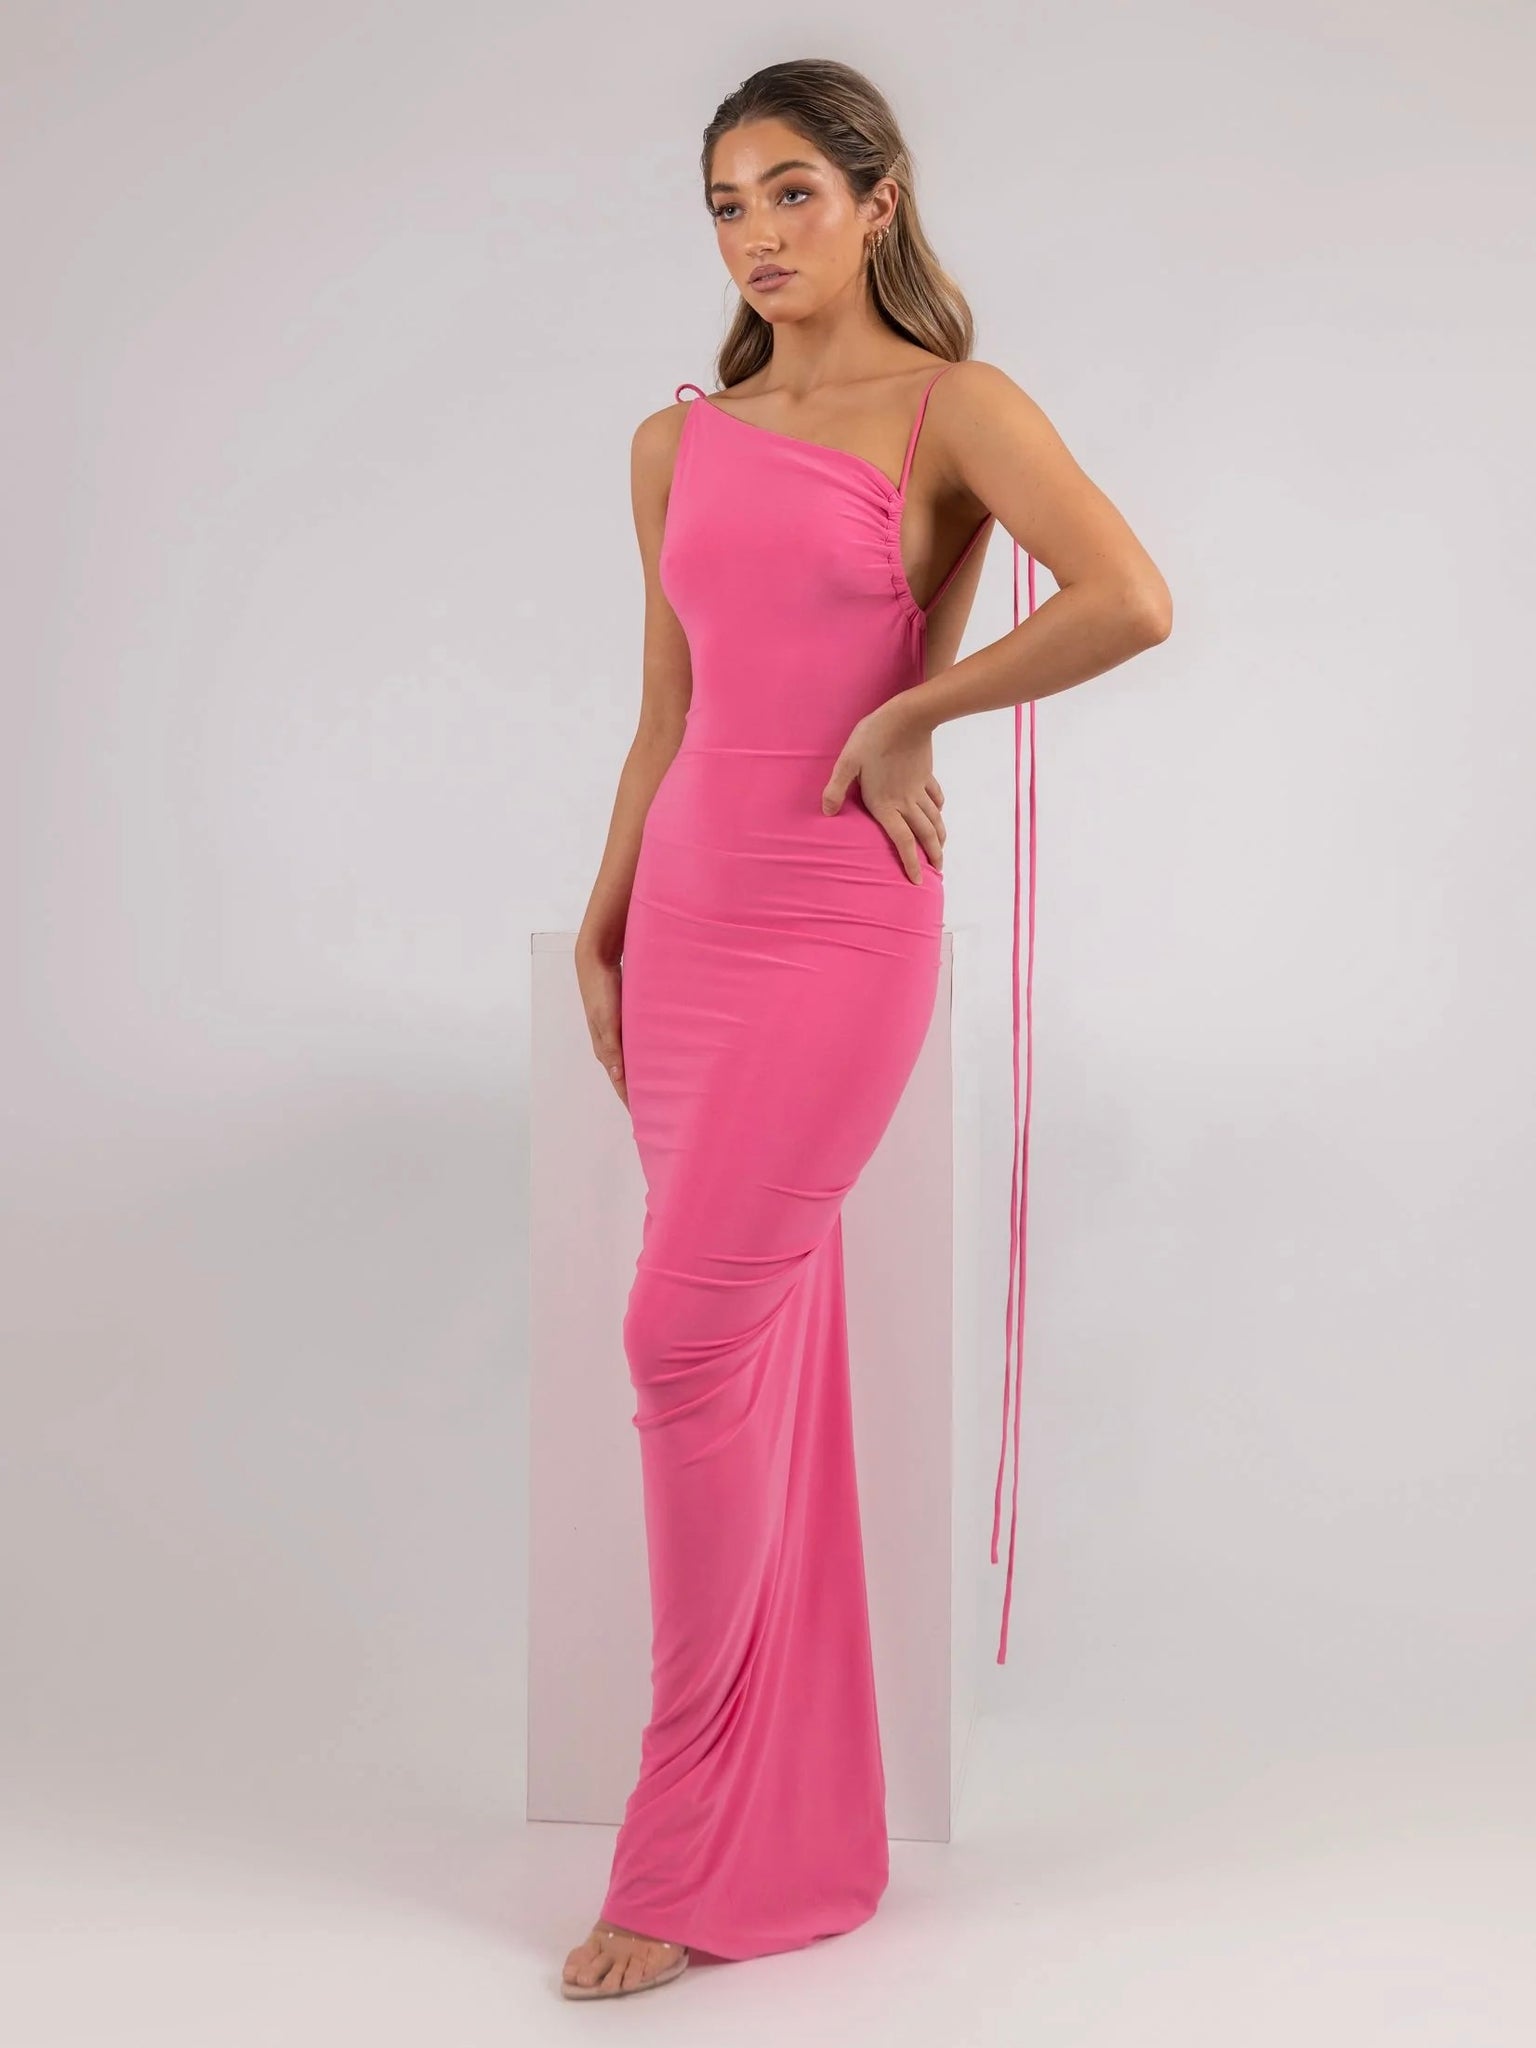 MÉLANI The Label GIA Pink Asymmetric Open Back Form Fitted Midi Dress